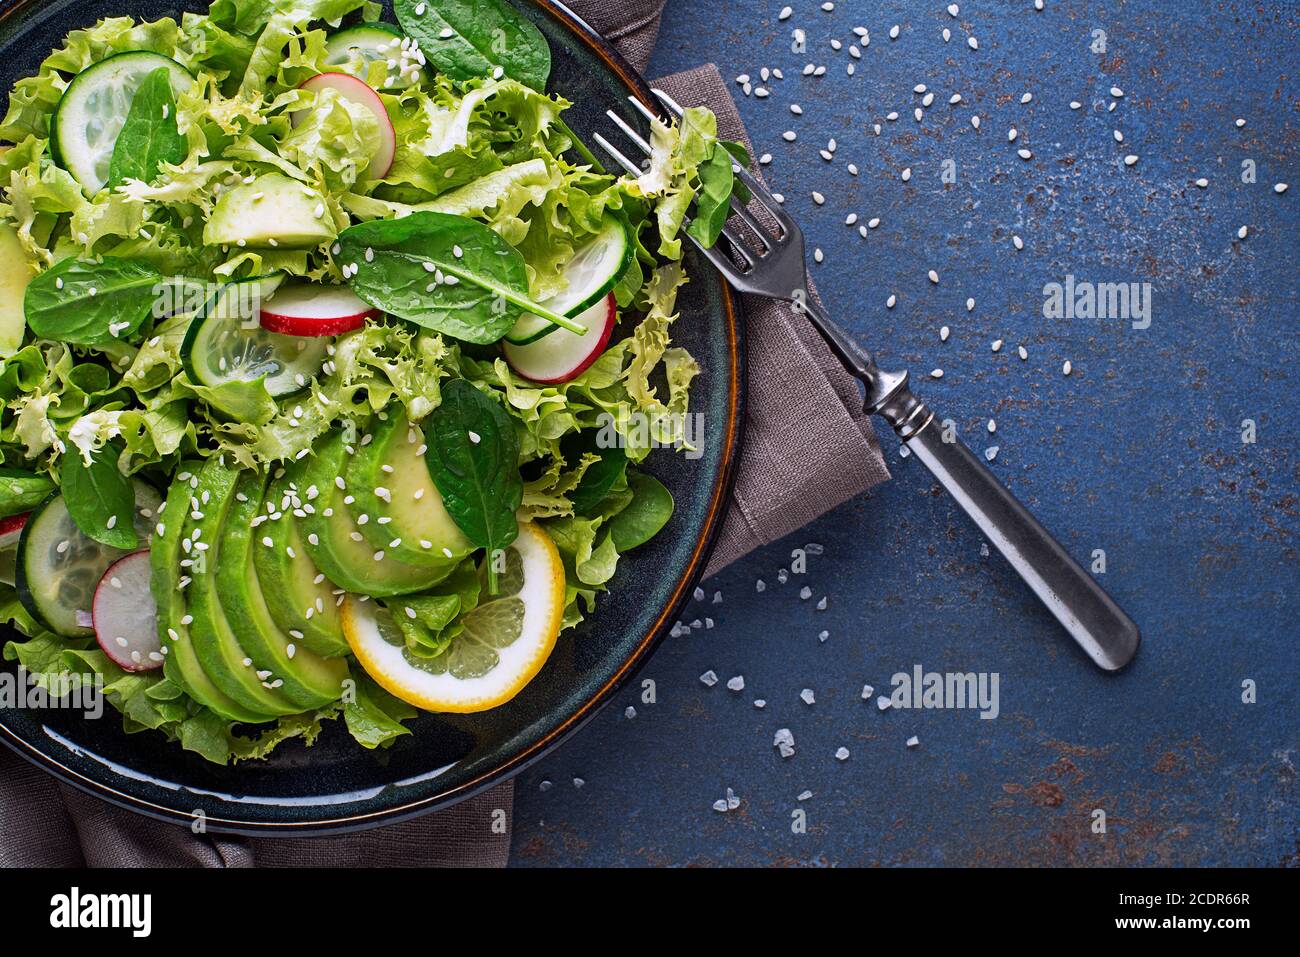 Healthy Green salad with avocado fresh light vegetables close up Stock Photo